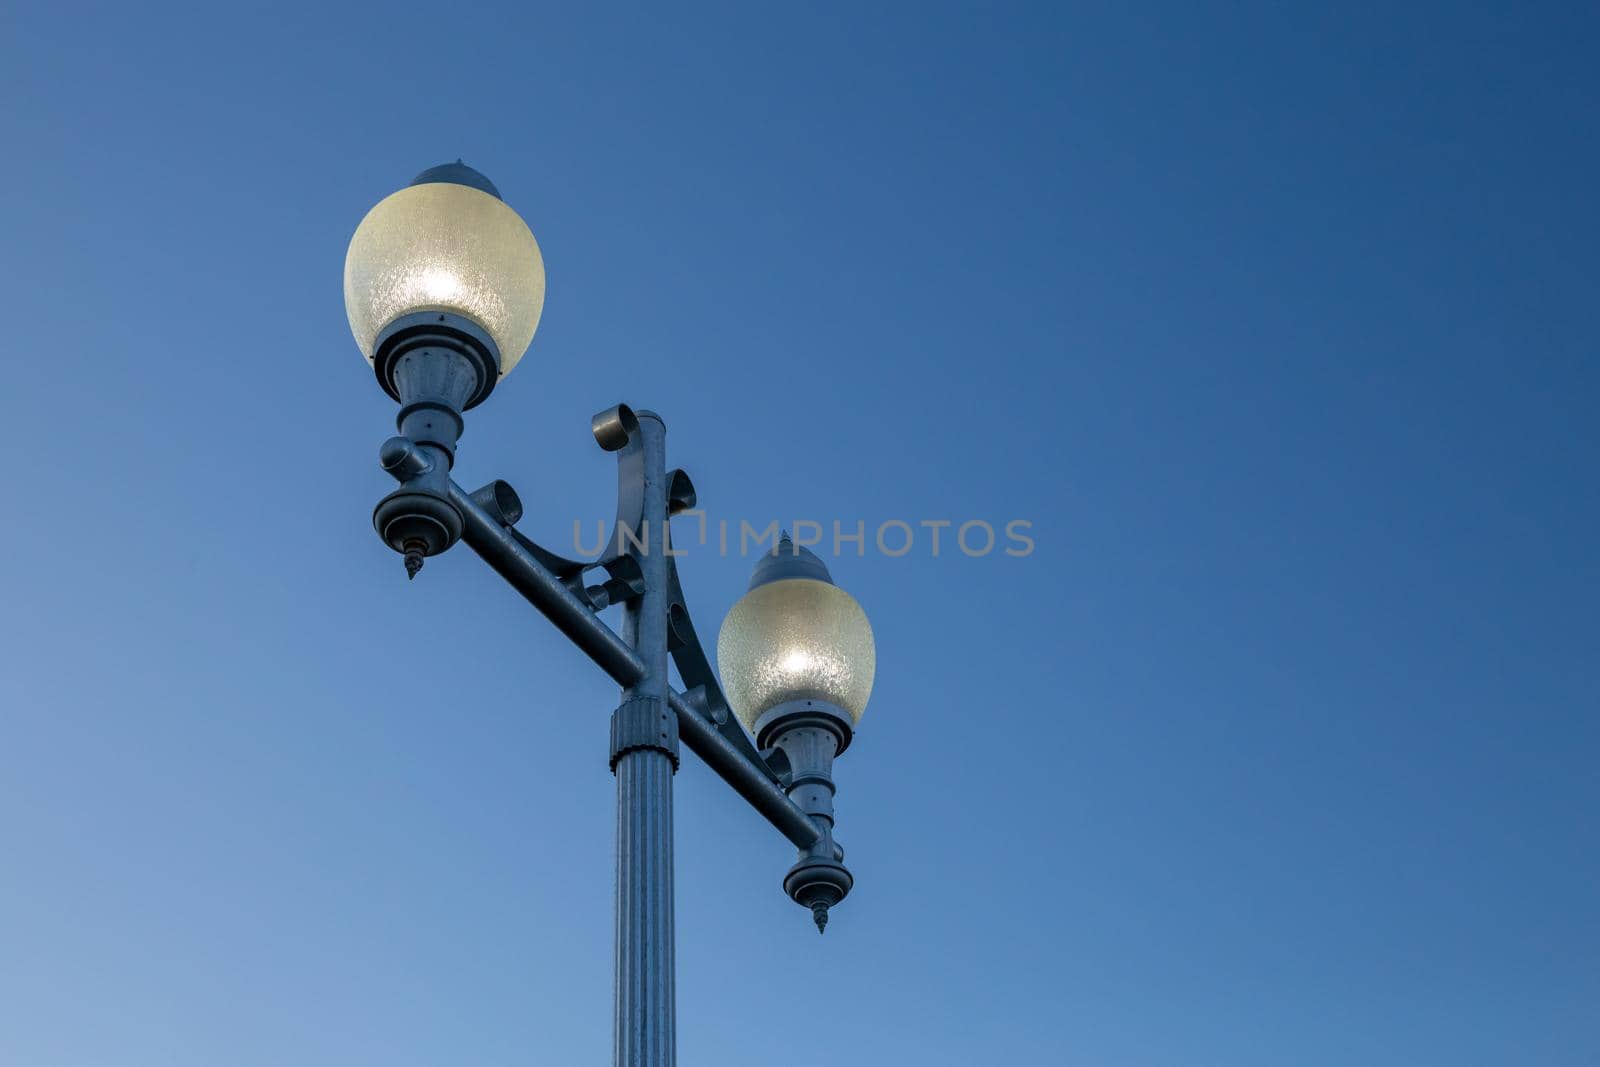 A city lamppost is seen from a low angle against a gradient blue sky. The lights are illuminated in foggy glass casing atop a blue metal stand.